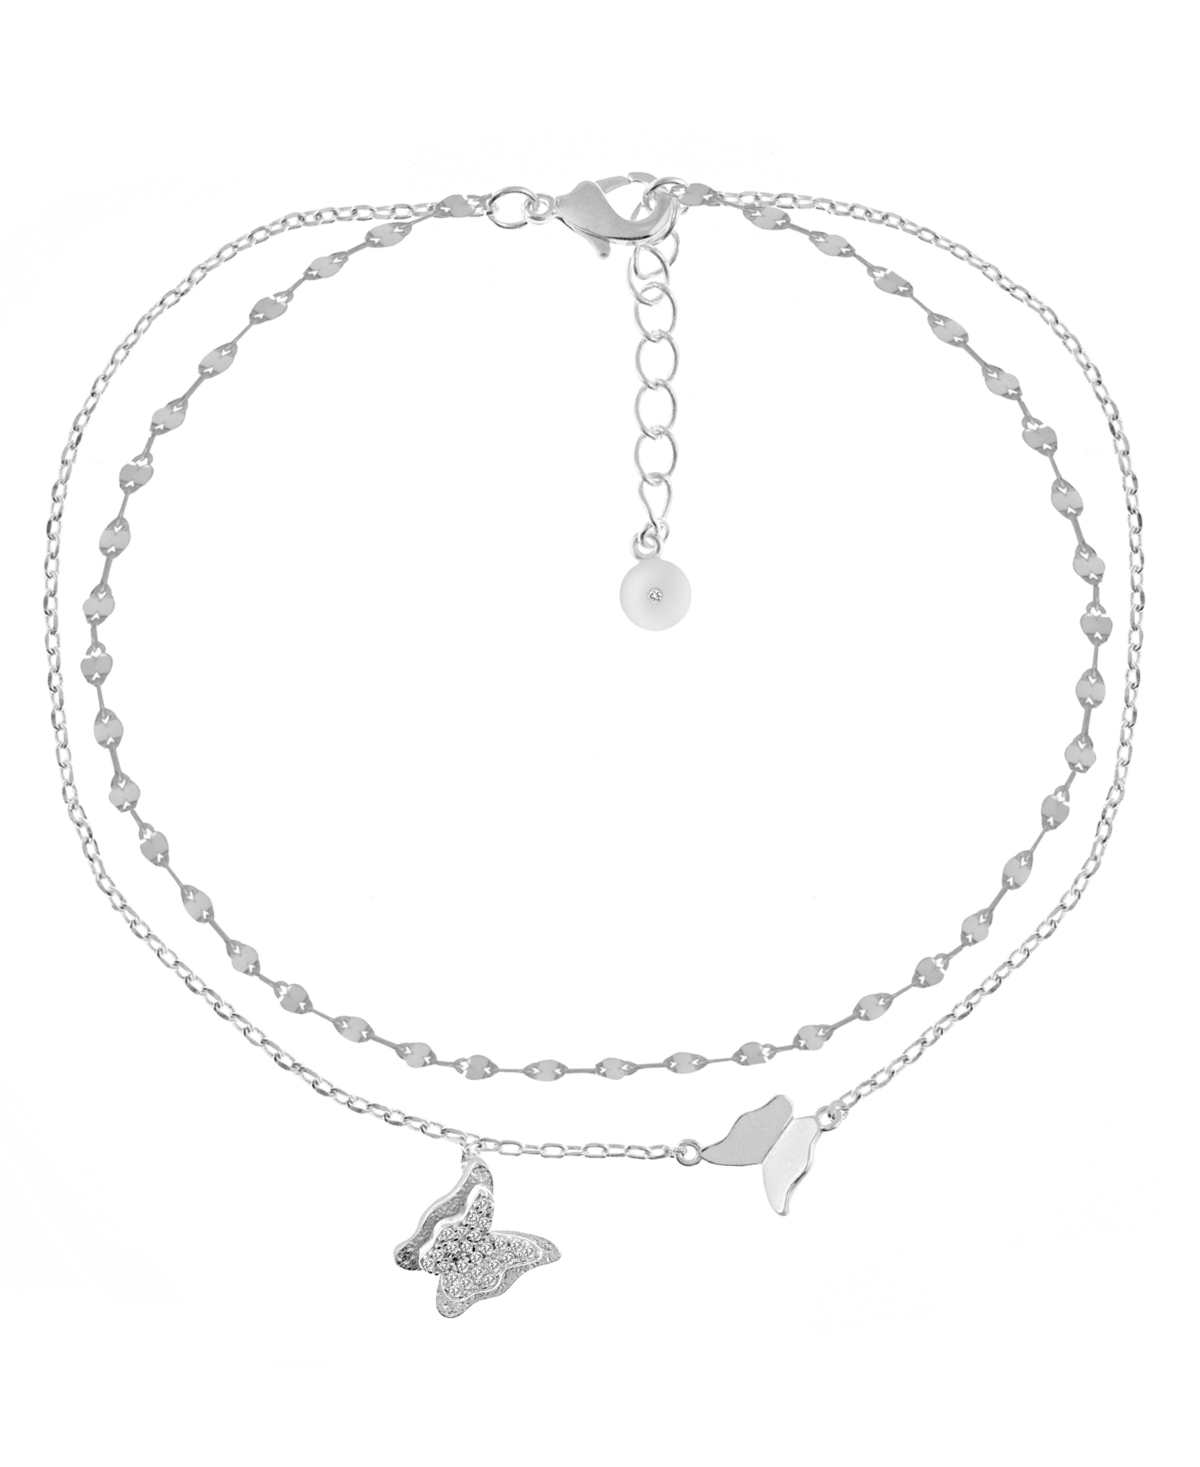 Cubic Zirconia Double Row Butterfly Charm Anklet in Silver Plate - Silver